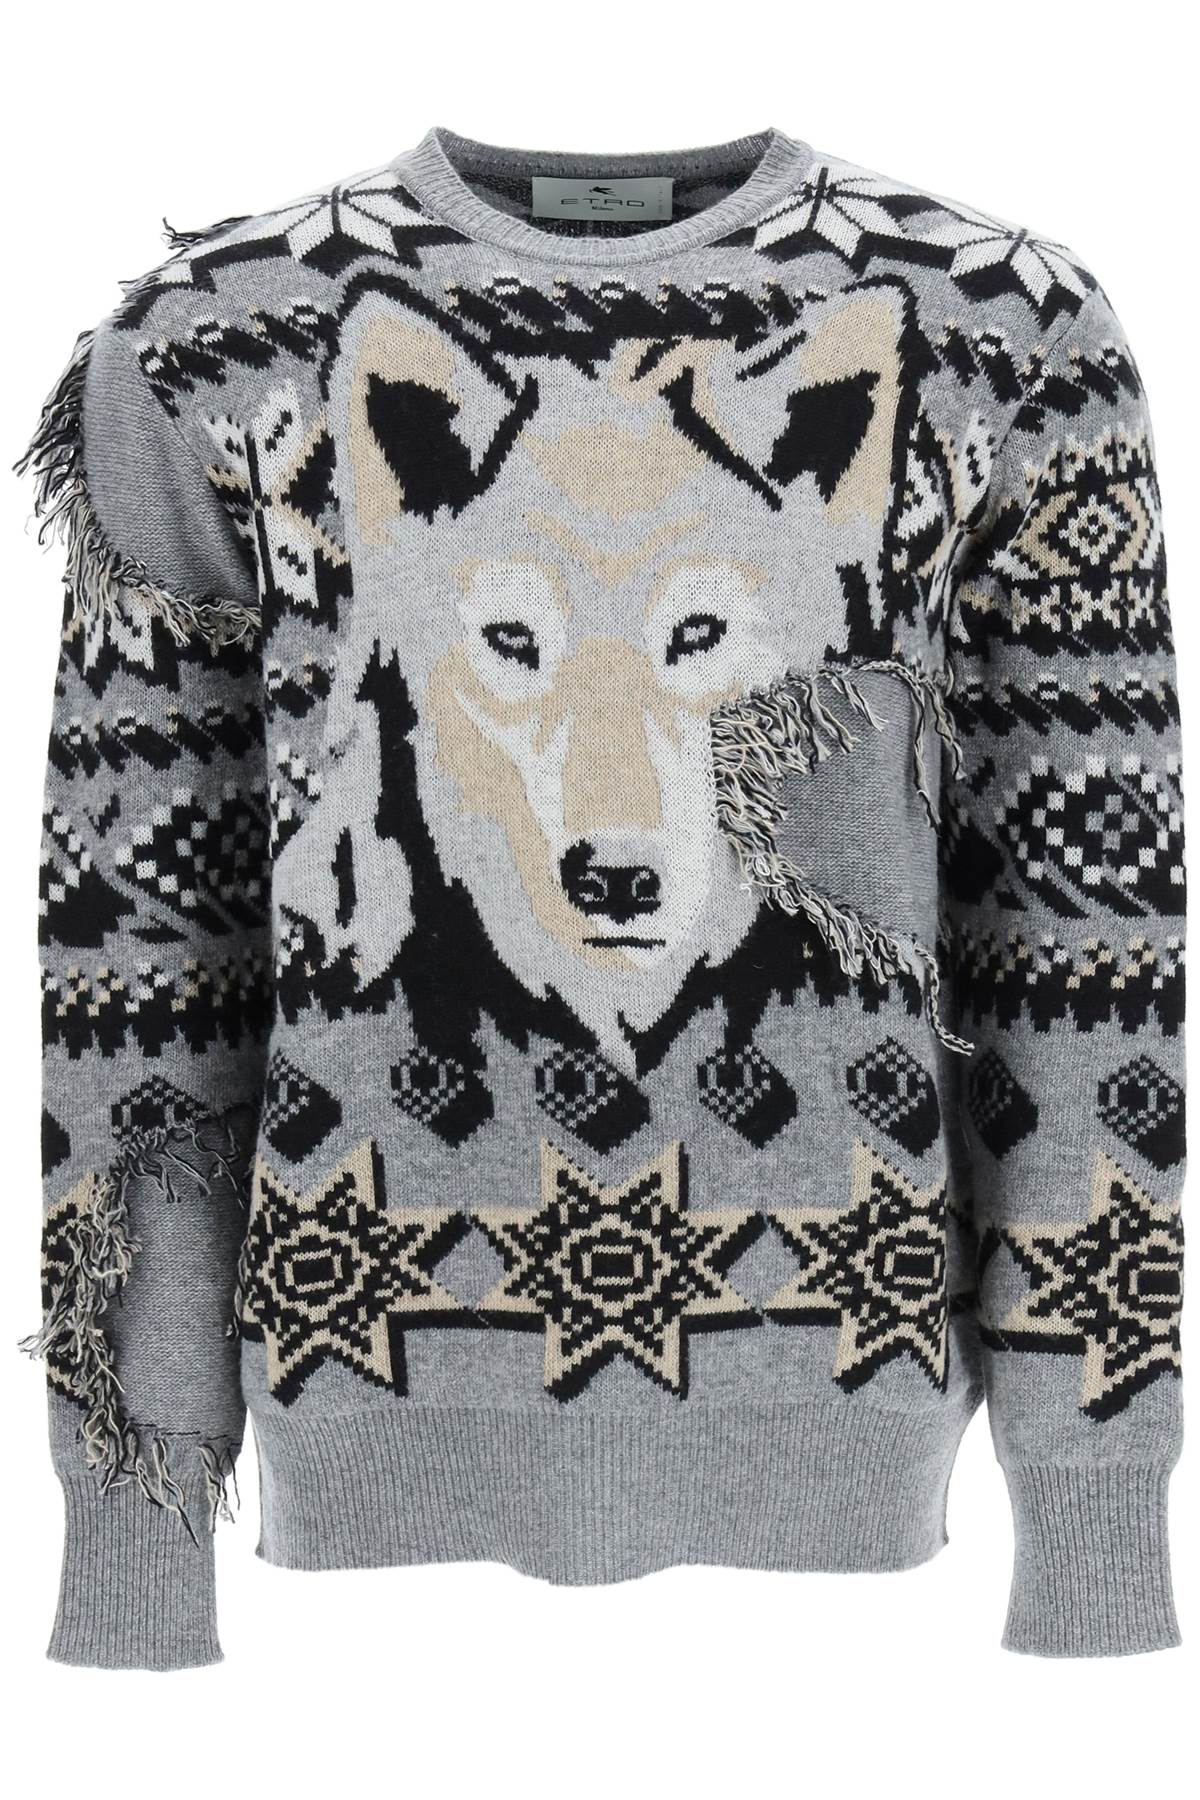 Etro Jacquard Wool Sweater With Wolf